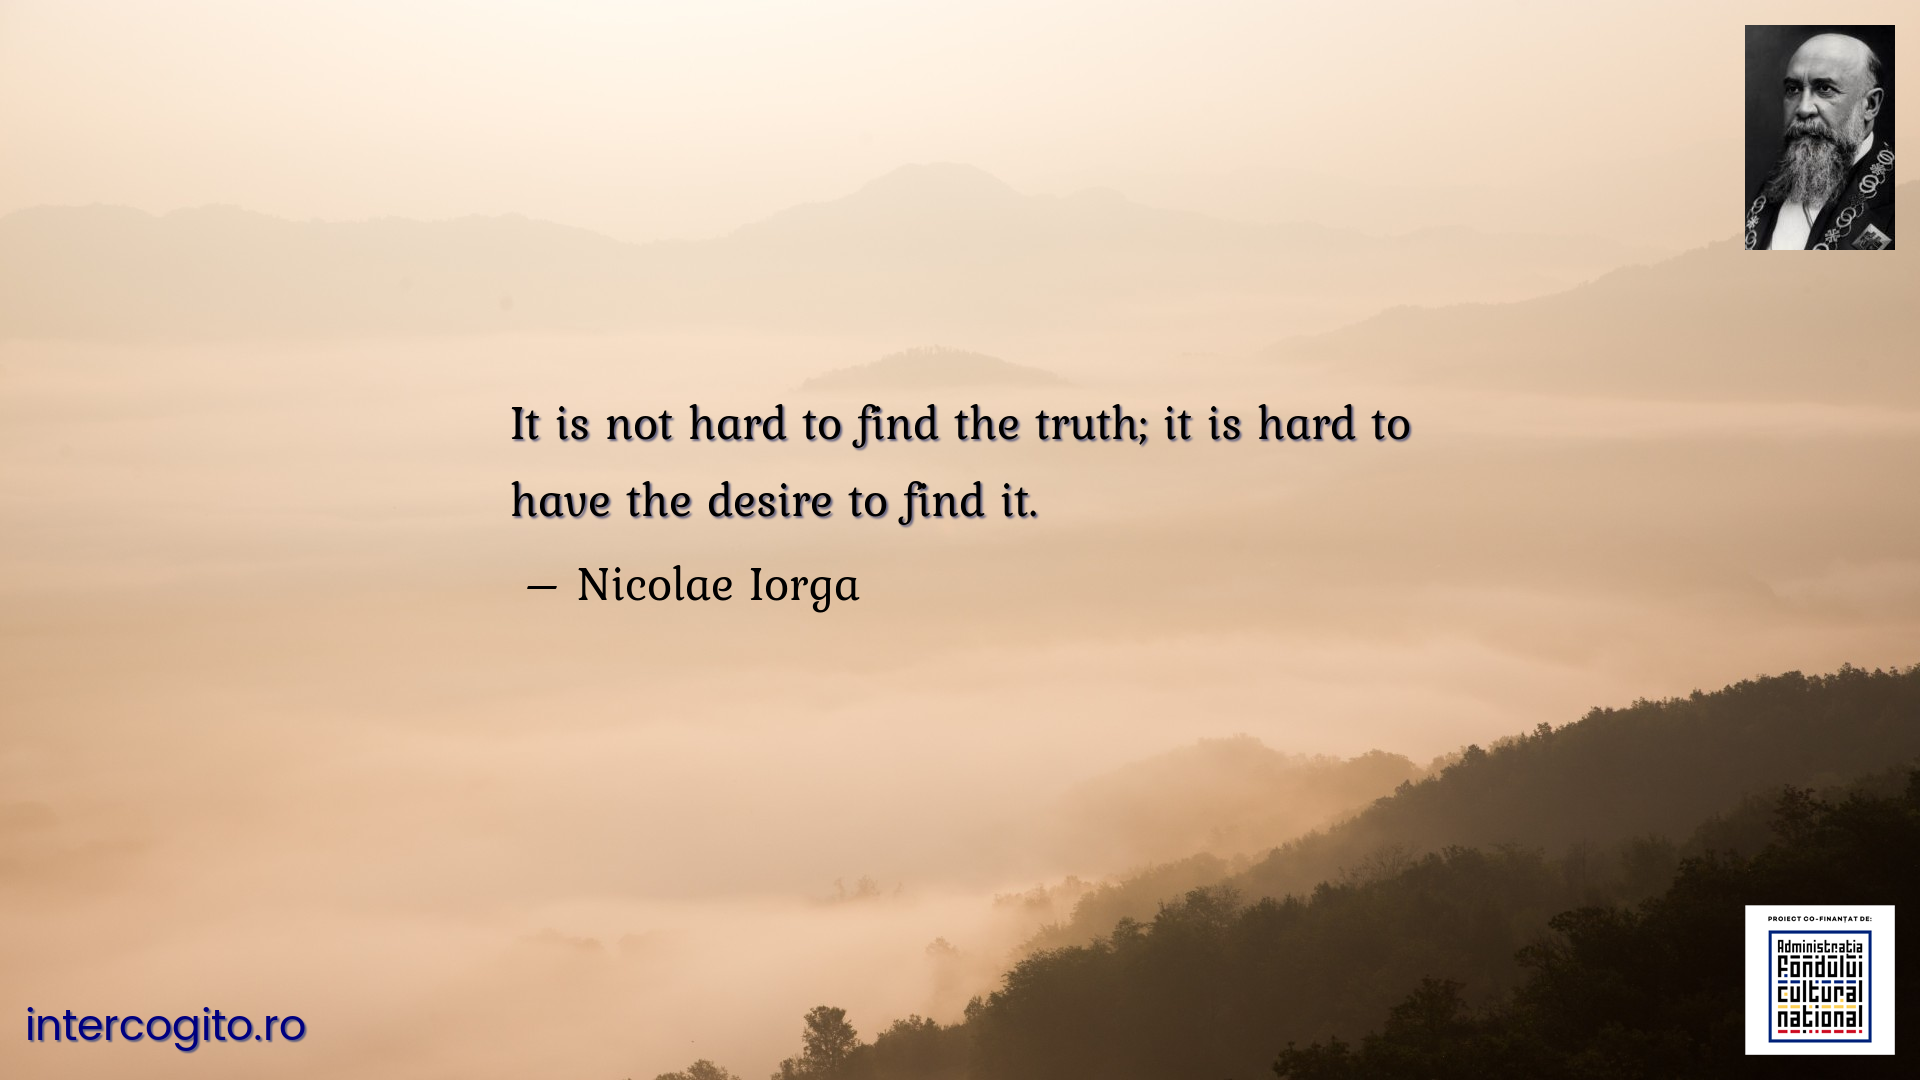 It is not hard to find the truth; it is hard to have the desire to find it.